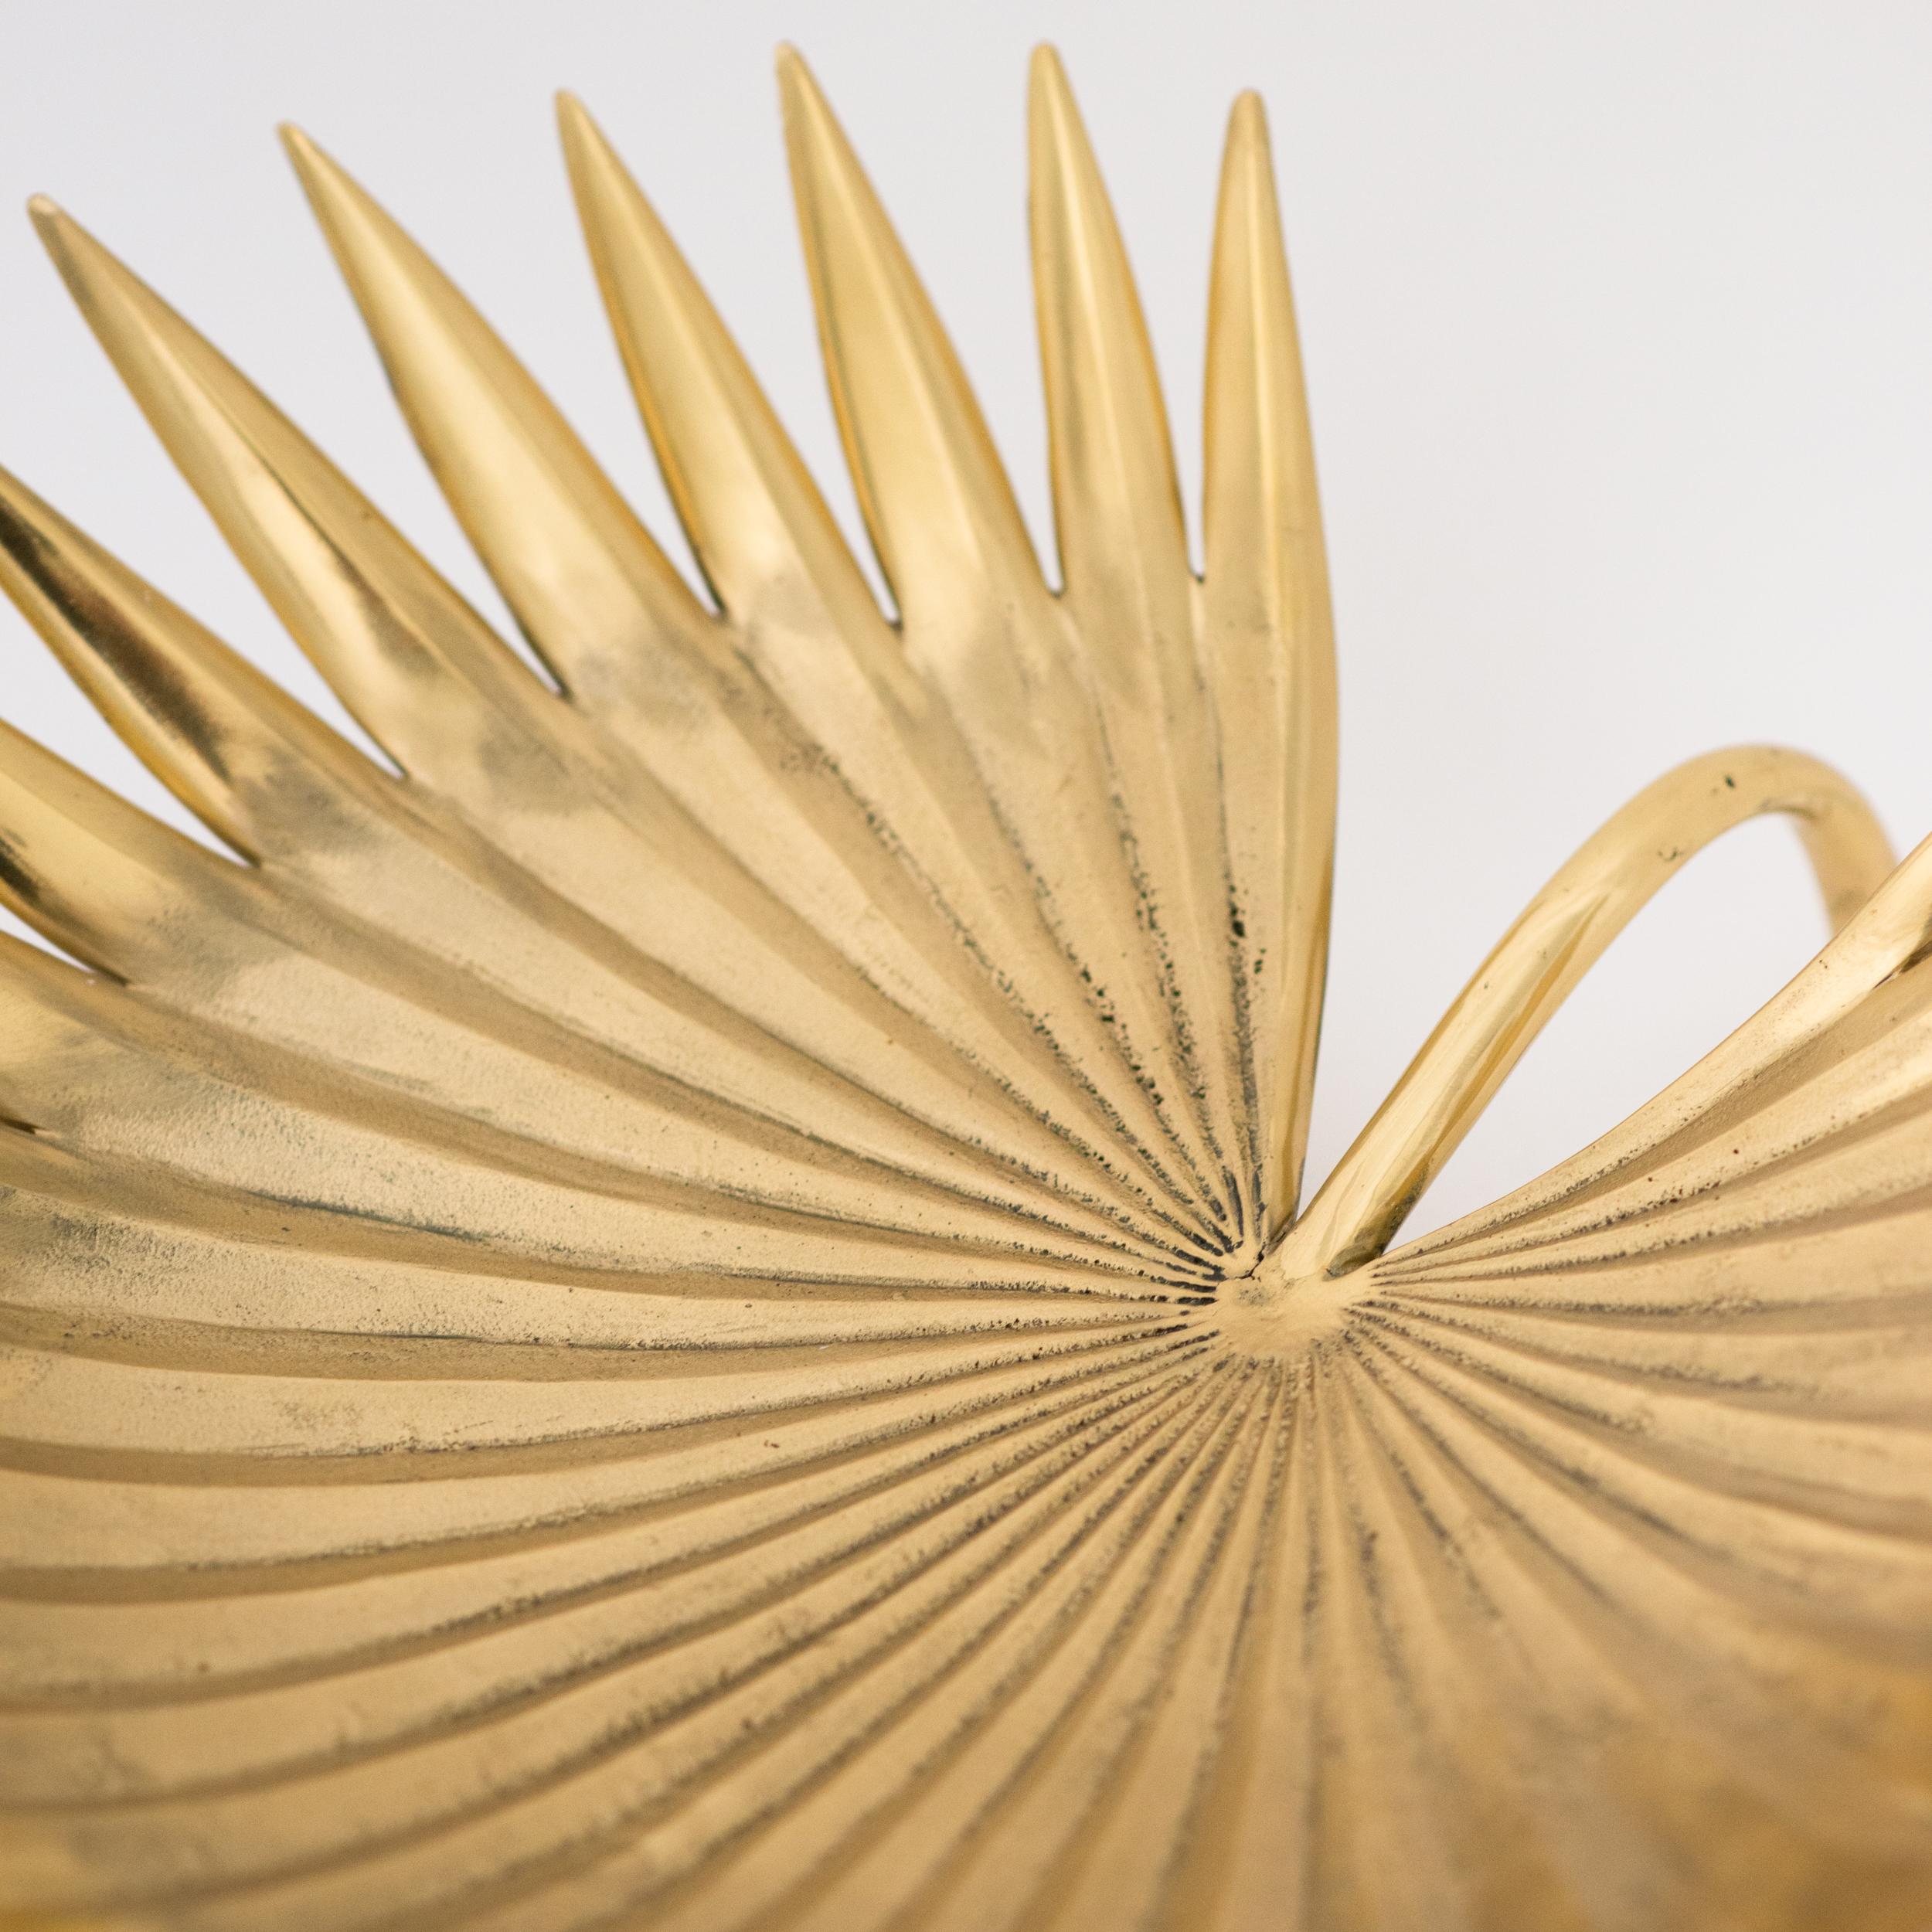 Stunning large hand-cast sculptural brass palm leaf with a mixed polished and raw finish.

Slight variations in the patina and polished finishes, patterns and sizes are characteristics of such original handmade creations. These characteristics